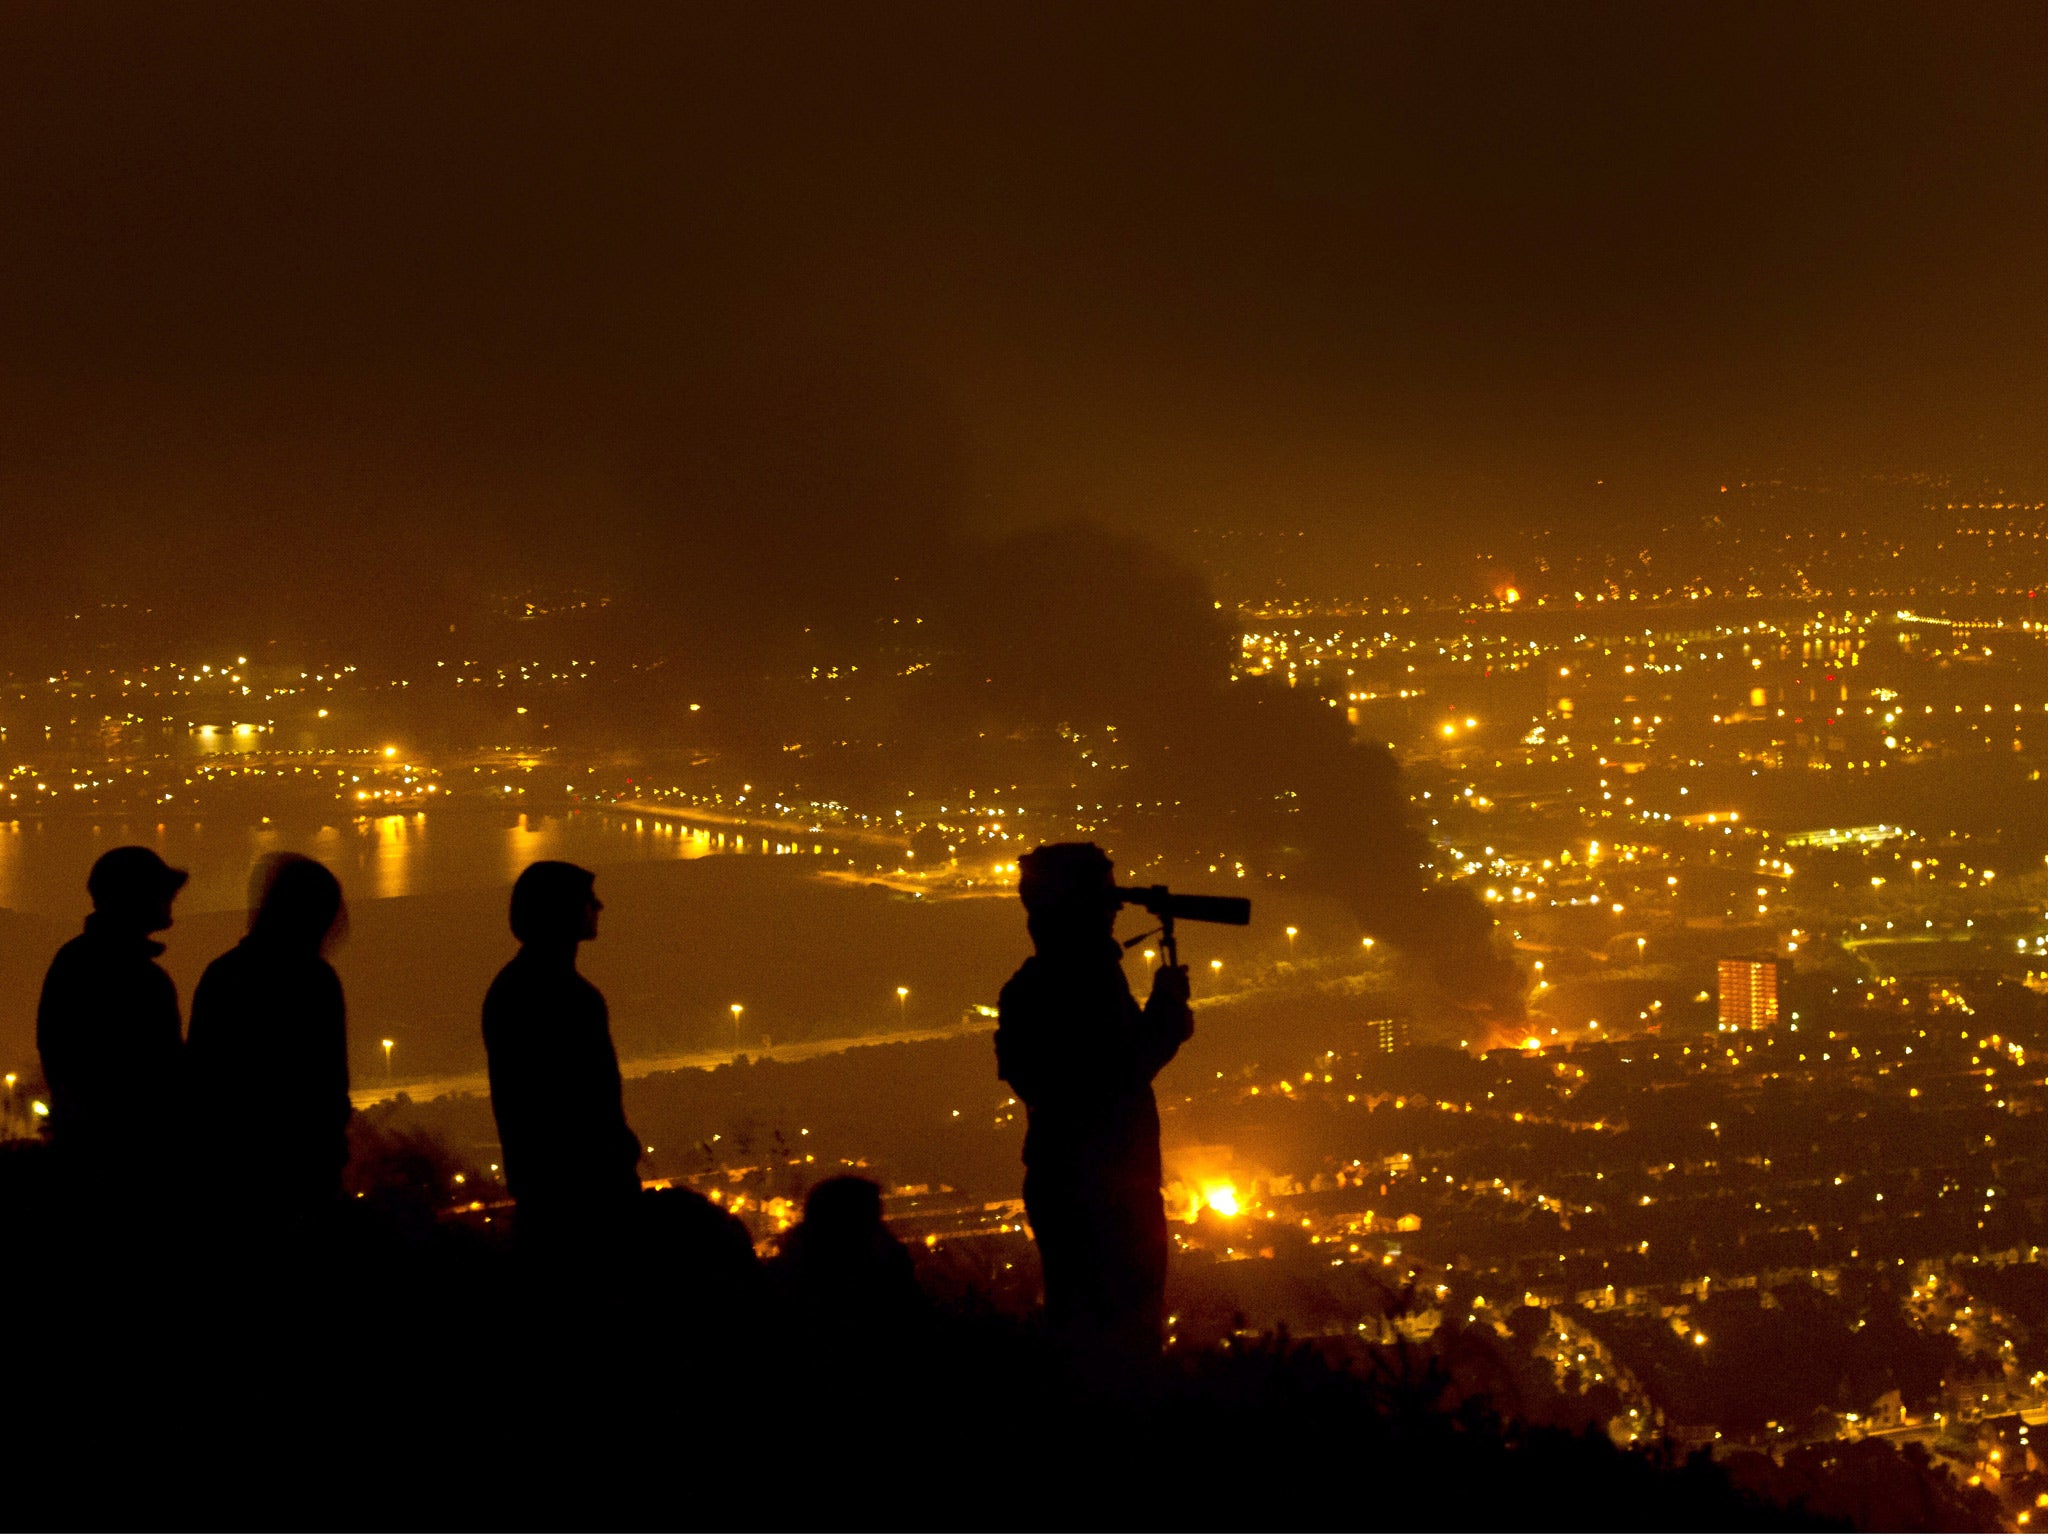 Loyalist youths watch bonfires burning across Belfast from the Cave Hill mountain high above the city July 12, 2014 in Belfast, Northern Ireland.